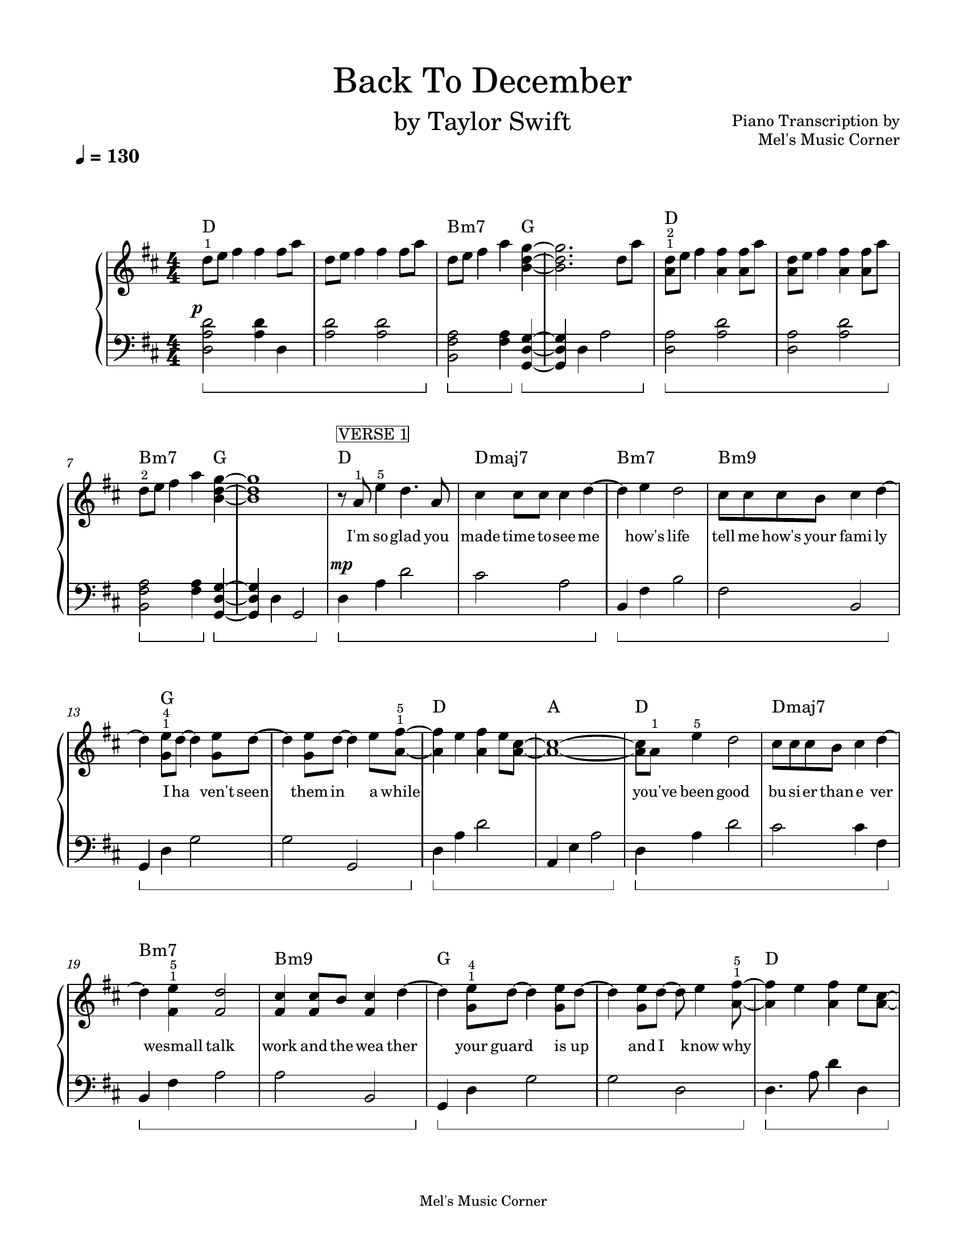 Taylor Swift - Back to December (piano sheet music) by Mel's Music Corner